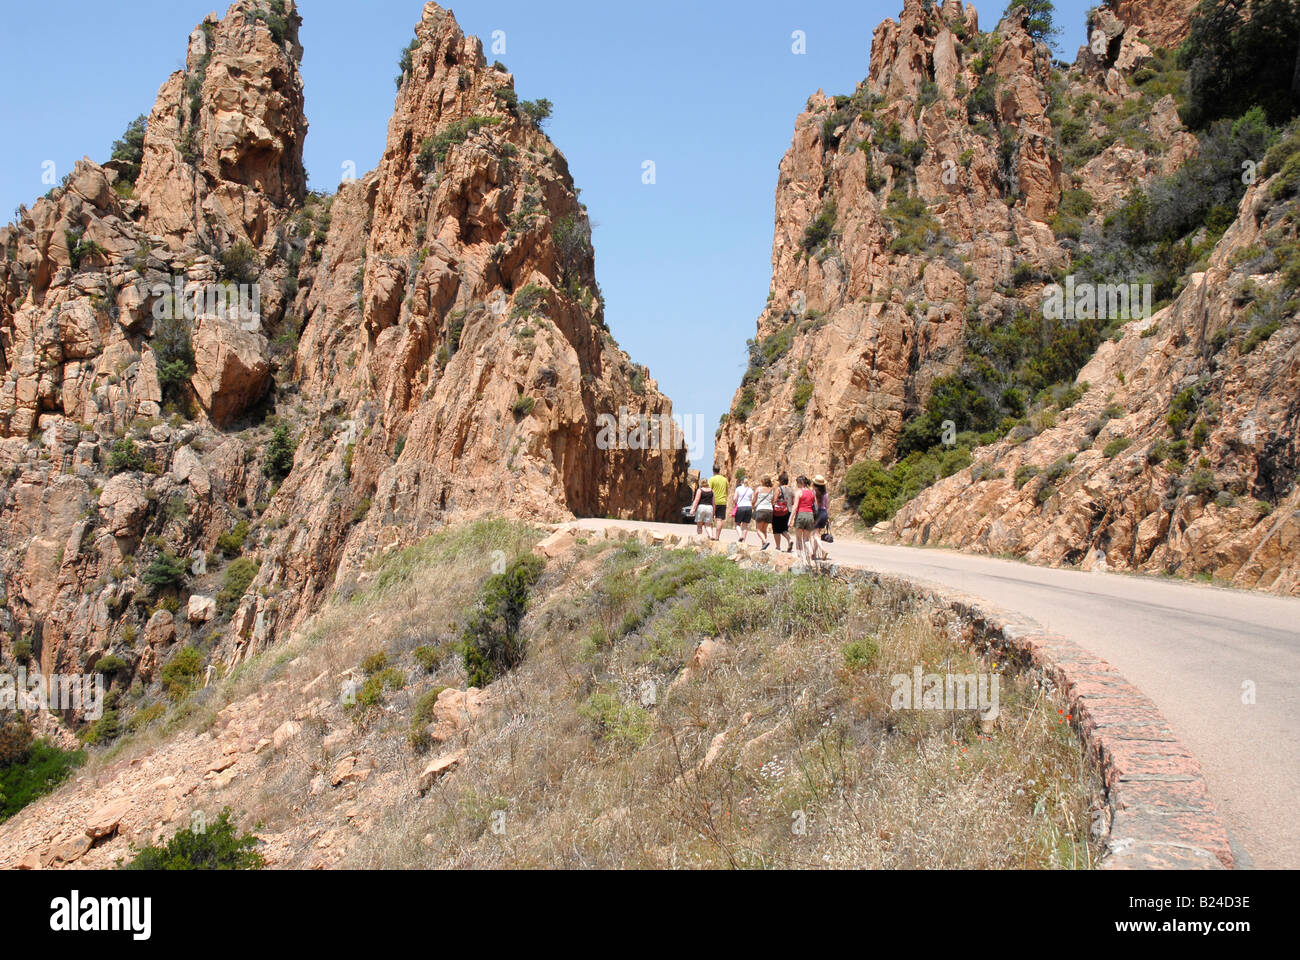 Visitors and tourist walking through the mountainous road of north western Corsica Stock Photo